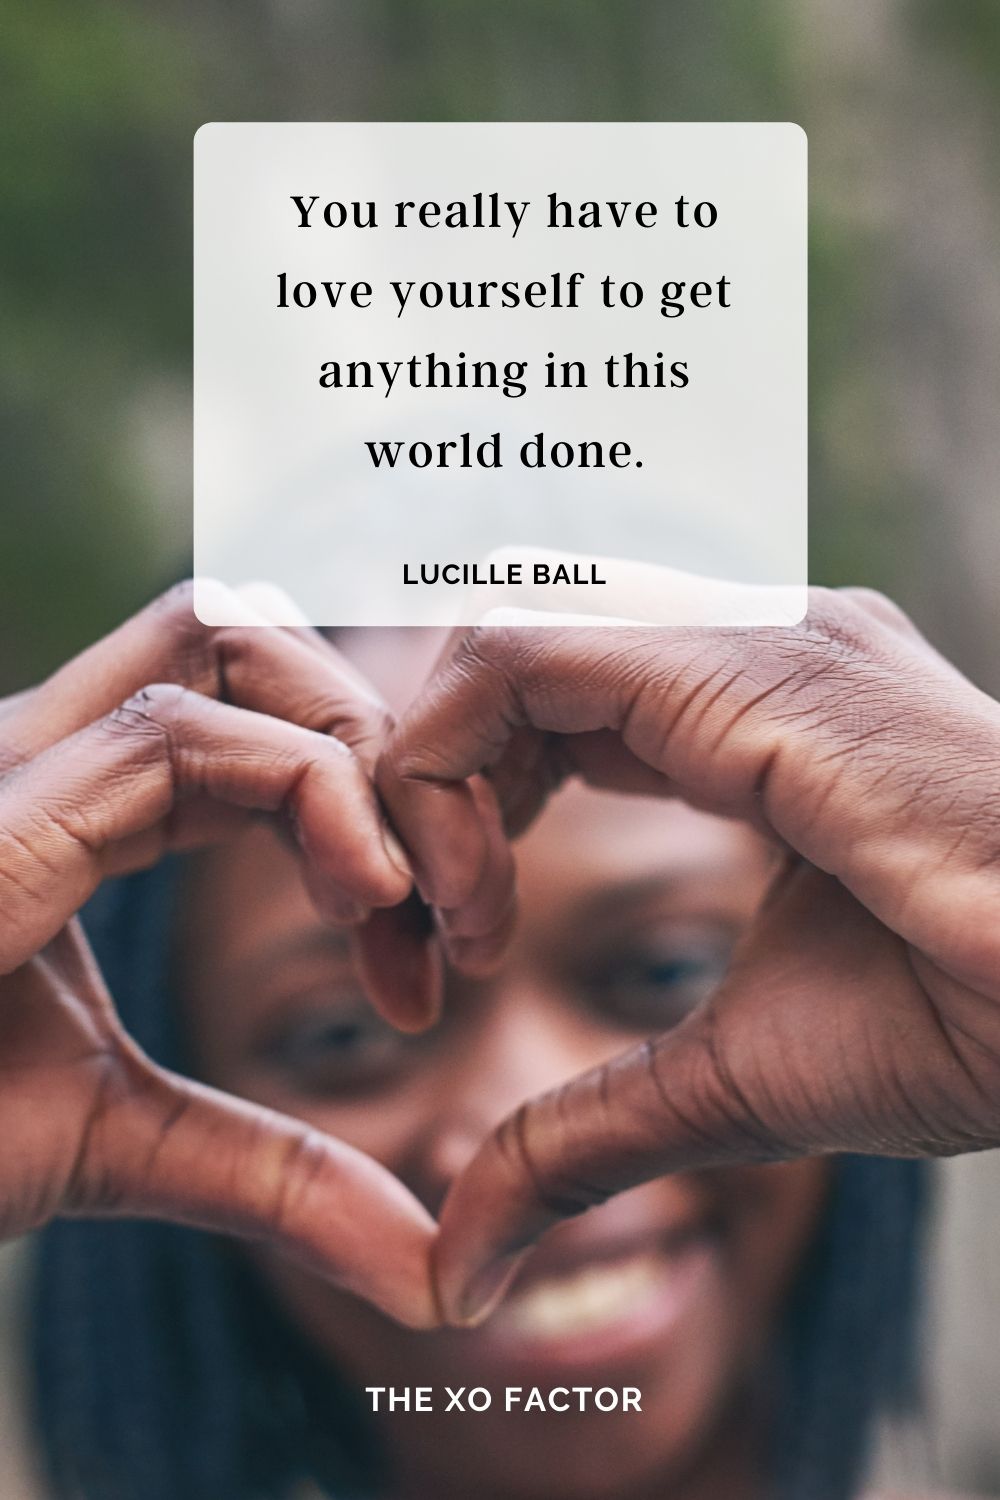 You really have to love yourself to get anything in this world done. Lucille Ball